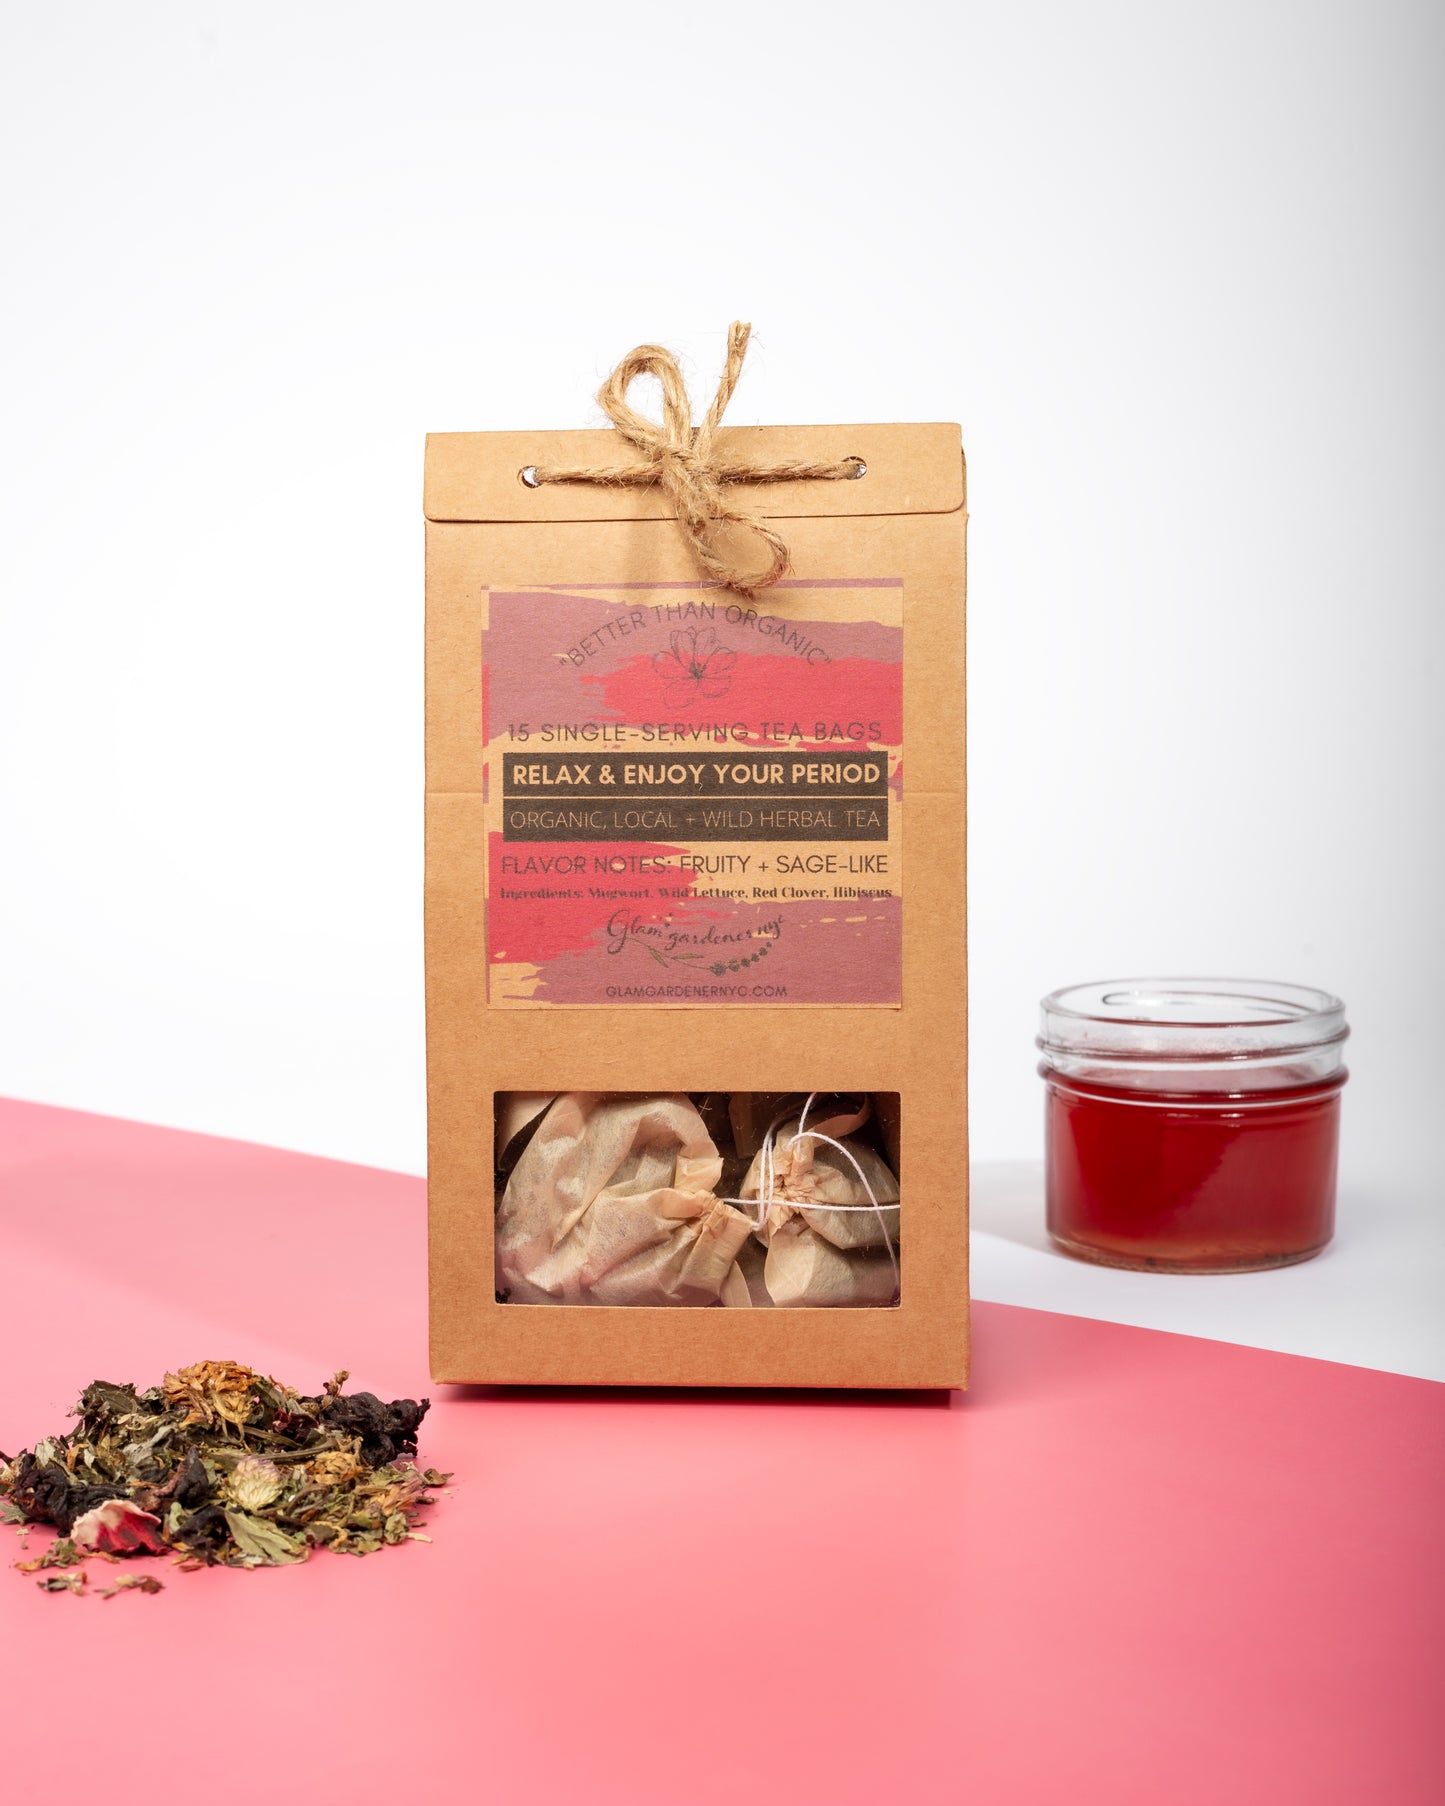 Relax & Enjoy Your Period bagged herbal tea with mugwort, red clover, wild lettuce, and hibiscus for a pleasant period and PMS relief